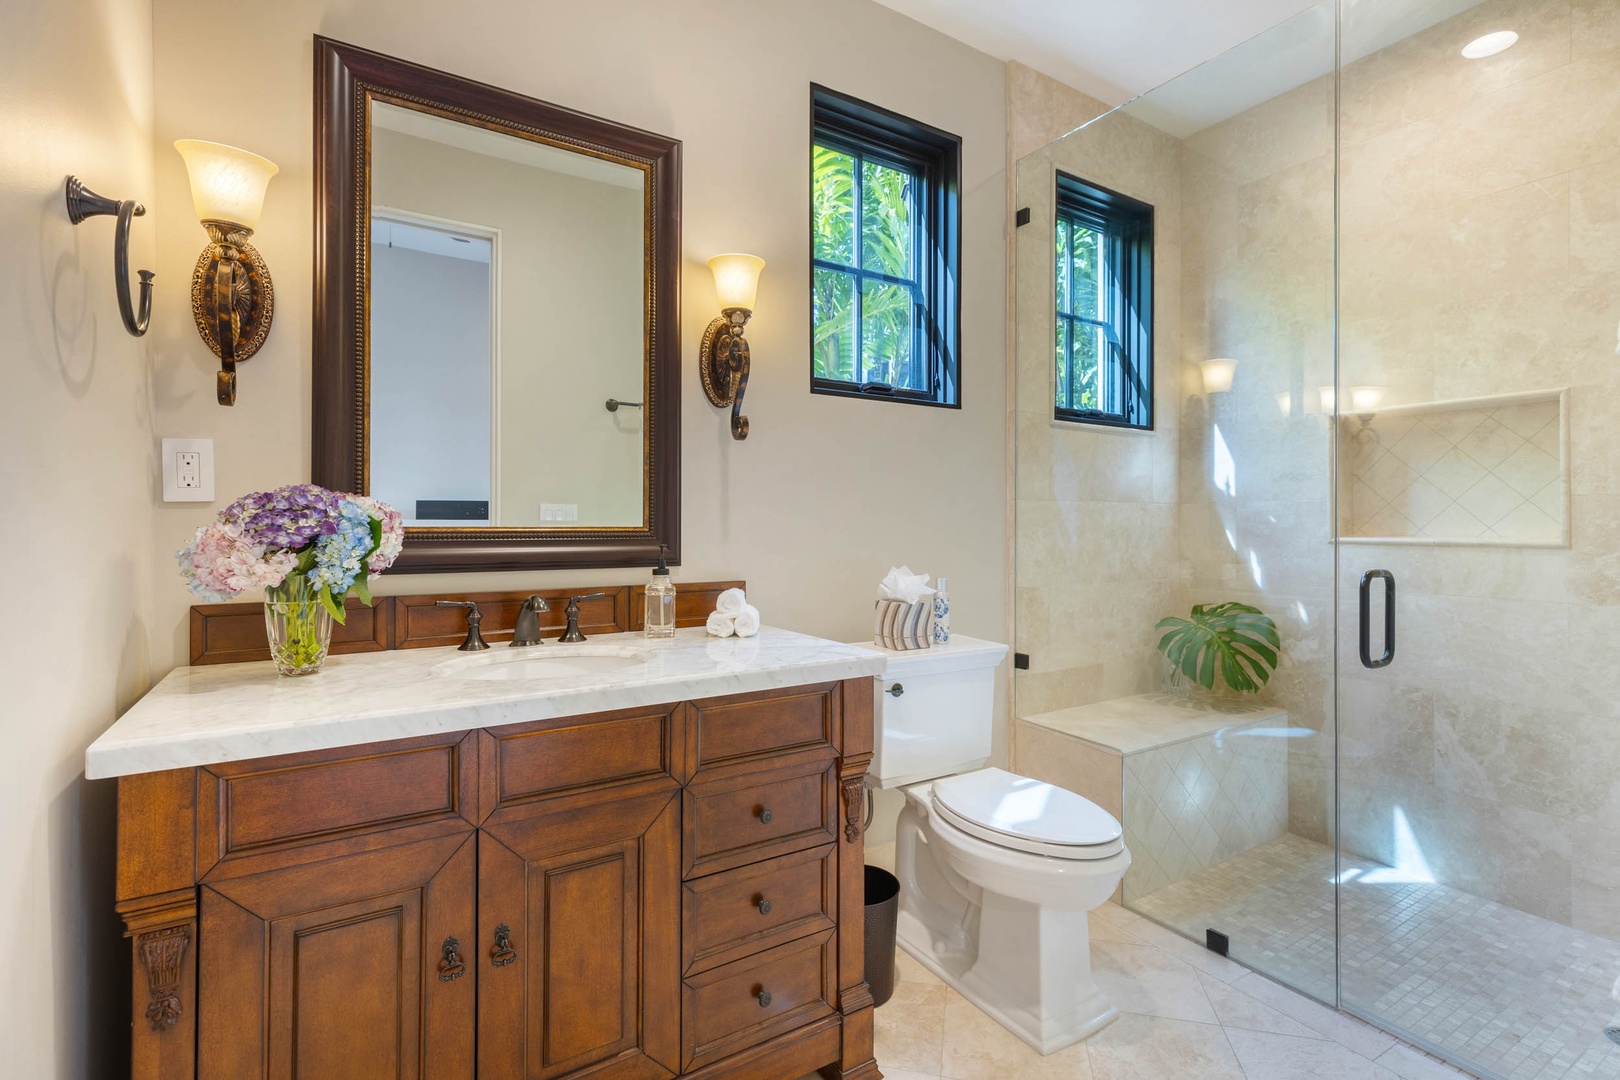 Honolulu Vacation Rentals, Royal Kahala Estate - Full bath with a walk-in shower in a glass enclosure.